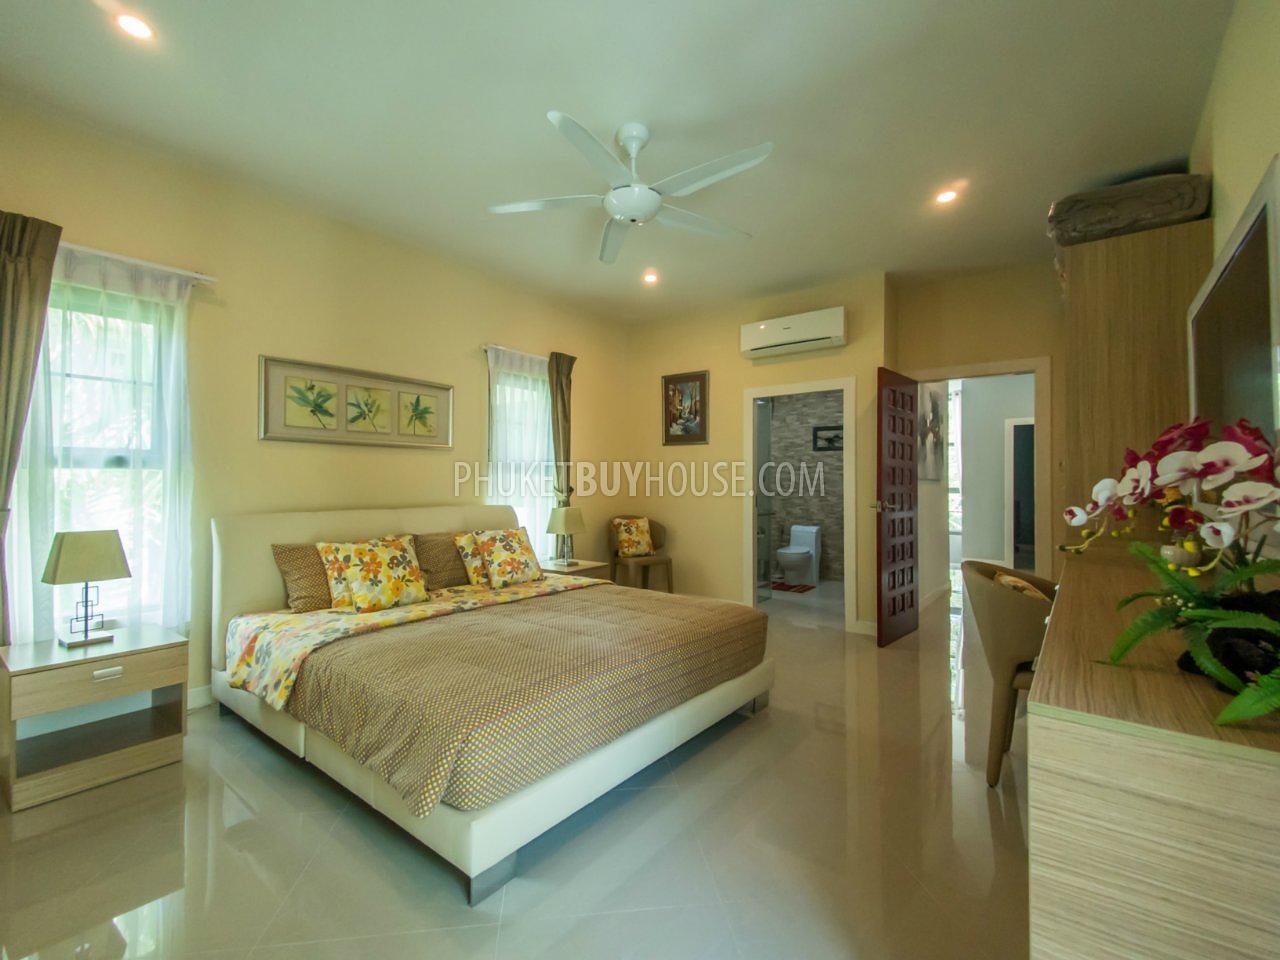 RAW6092: Beautiful 3 (up to 5) bedrooms Villa in Rawai with office and gym. Фото #32